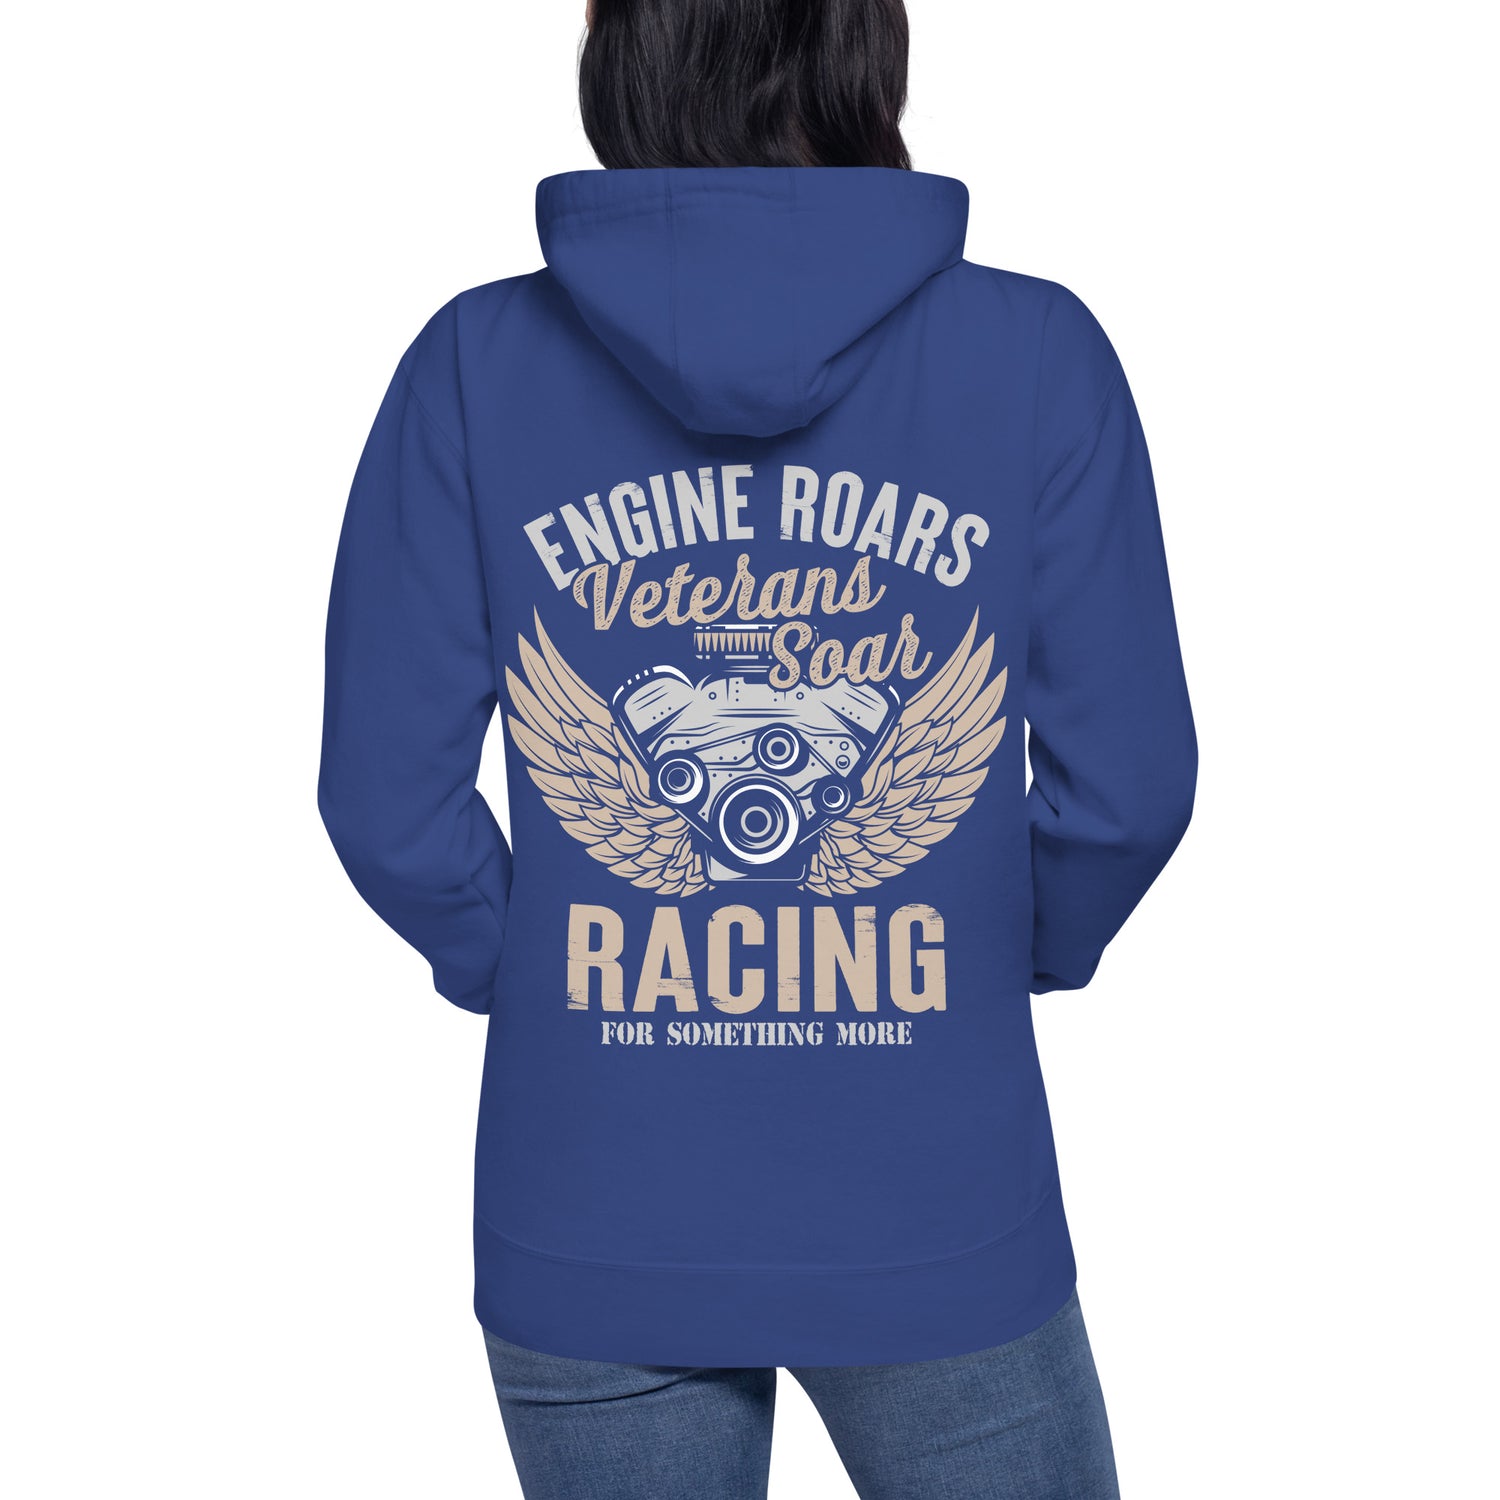 Laps of Honor Signature Series: Race-Inspired Hoodie for a Purpose!